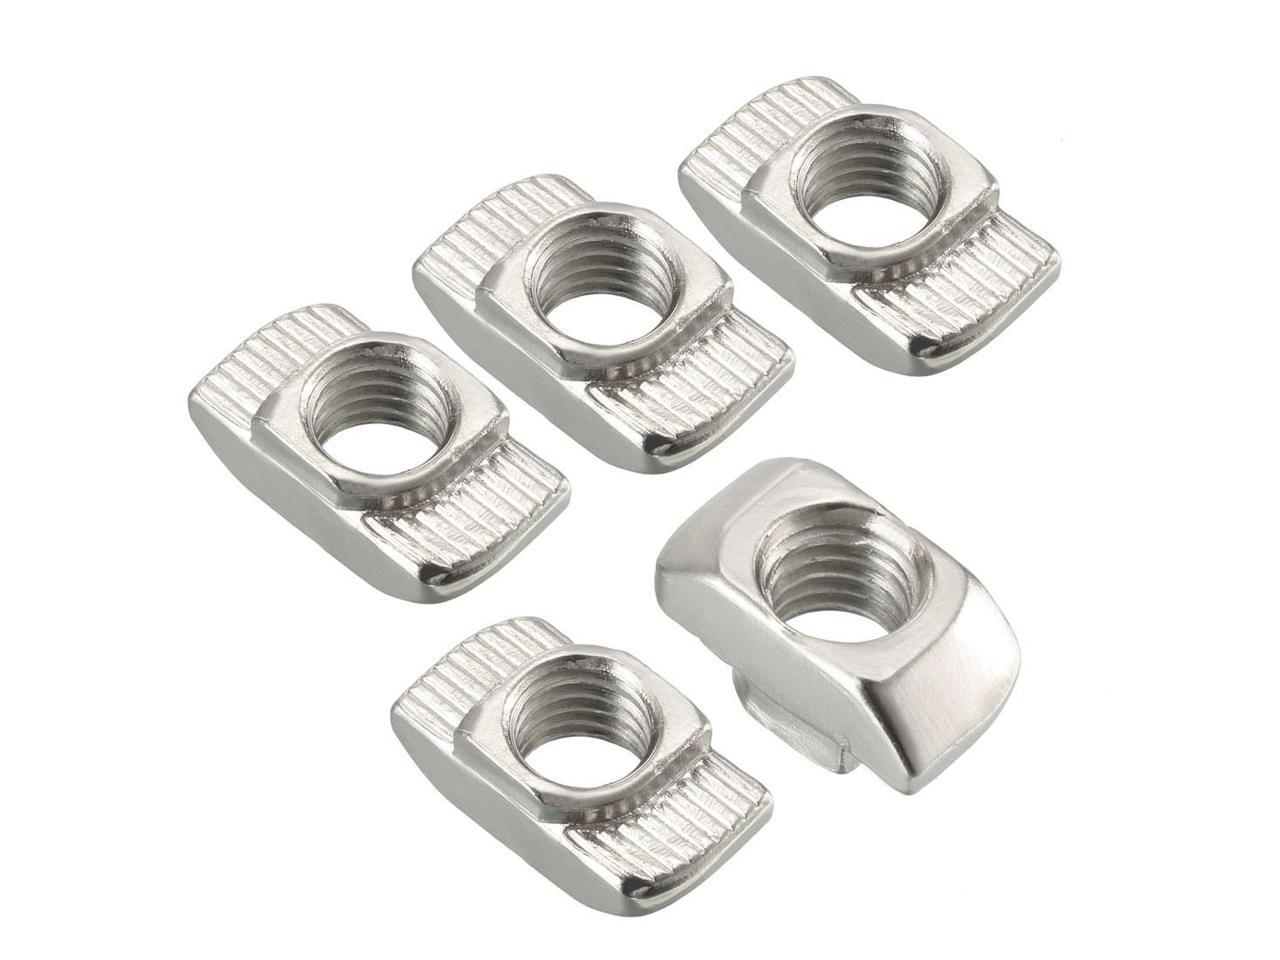 uxcell Sliding T Slot Nuts M5 Half Round Roll in T-Nut for 4545 Series Aluminum Extrusion Profile Pack of 10 Carbon Steel Nickel-Plated 